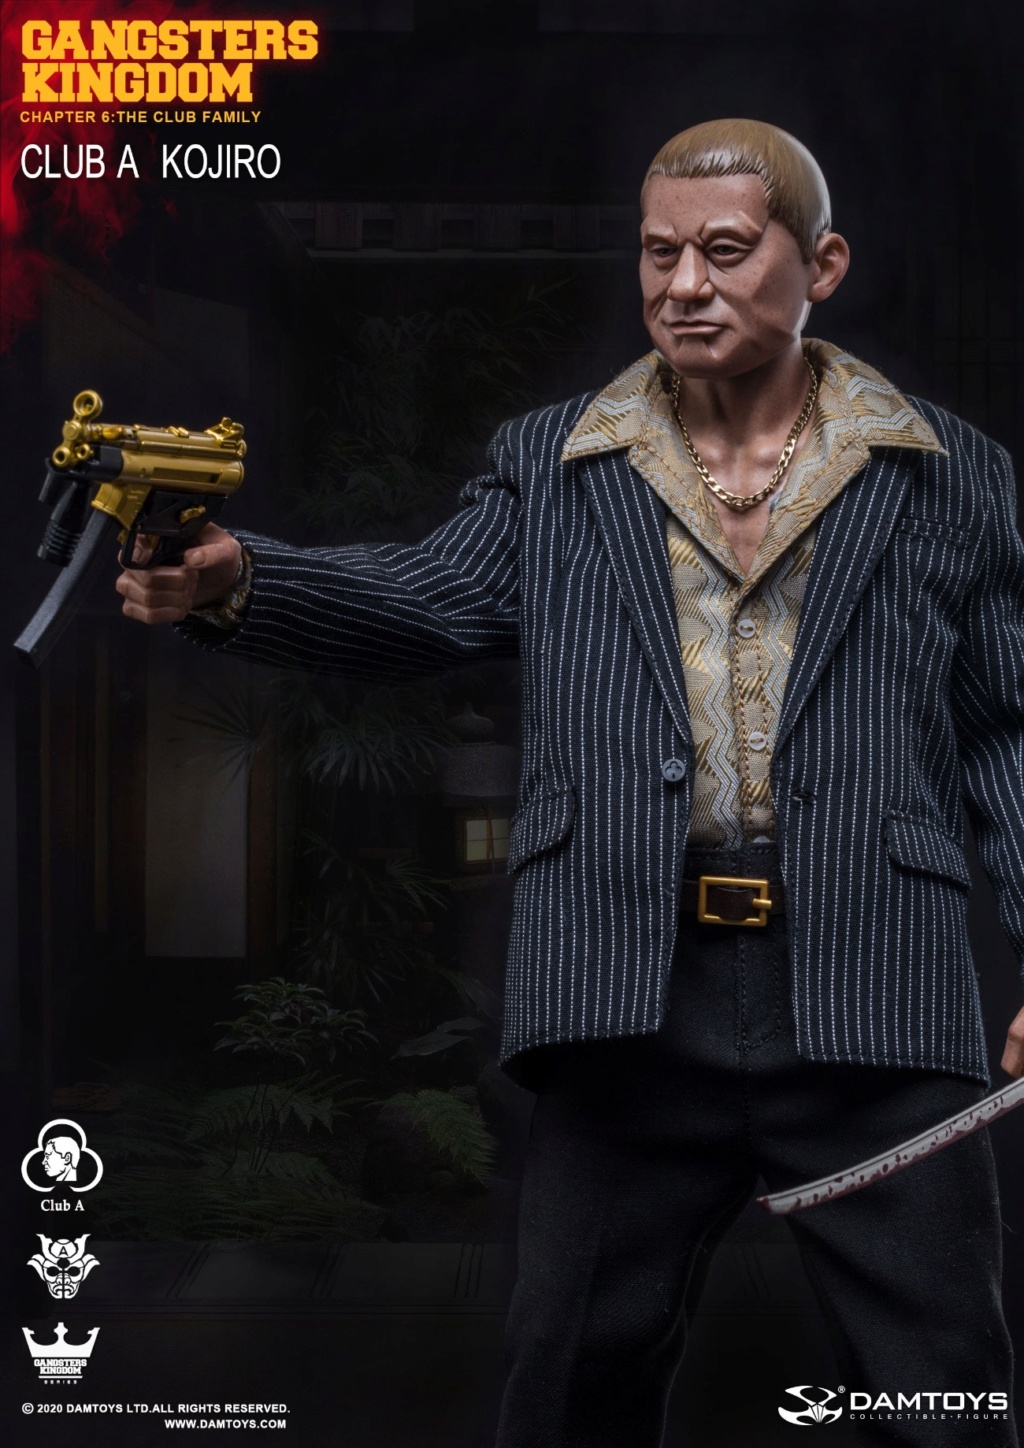 Asian - NEW PRODUCT: DamToys: 1/6 Gangster Kingdom-Grass Flower A KOJIRO Action Figure & Coffee Table Accessory Bag #GK021 15303911